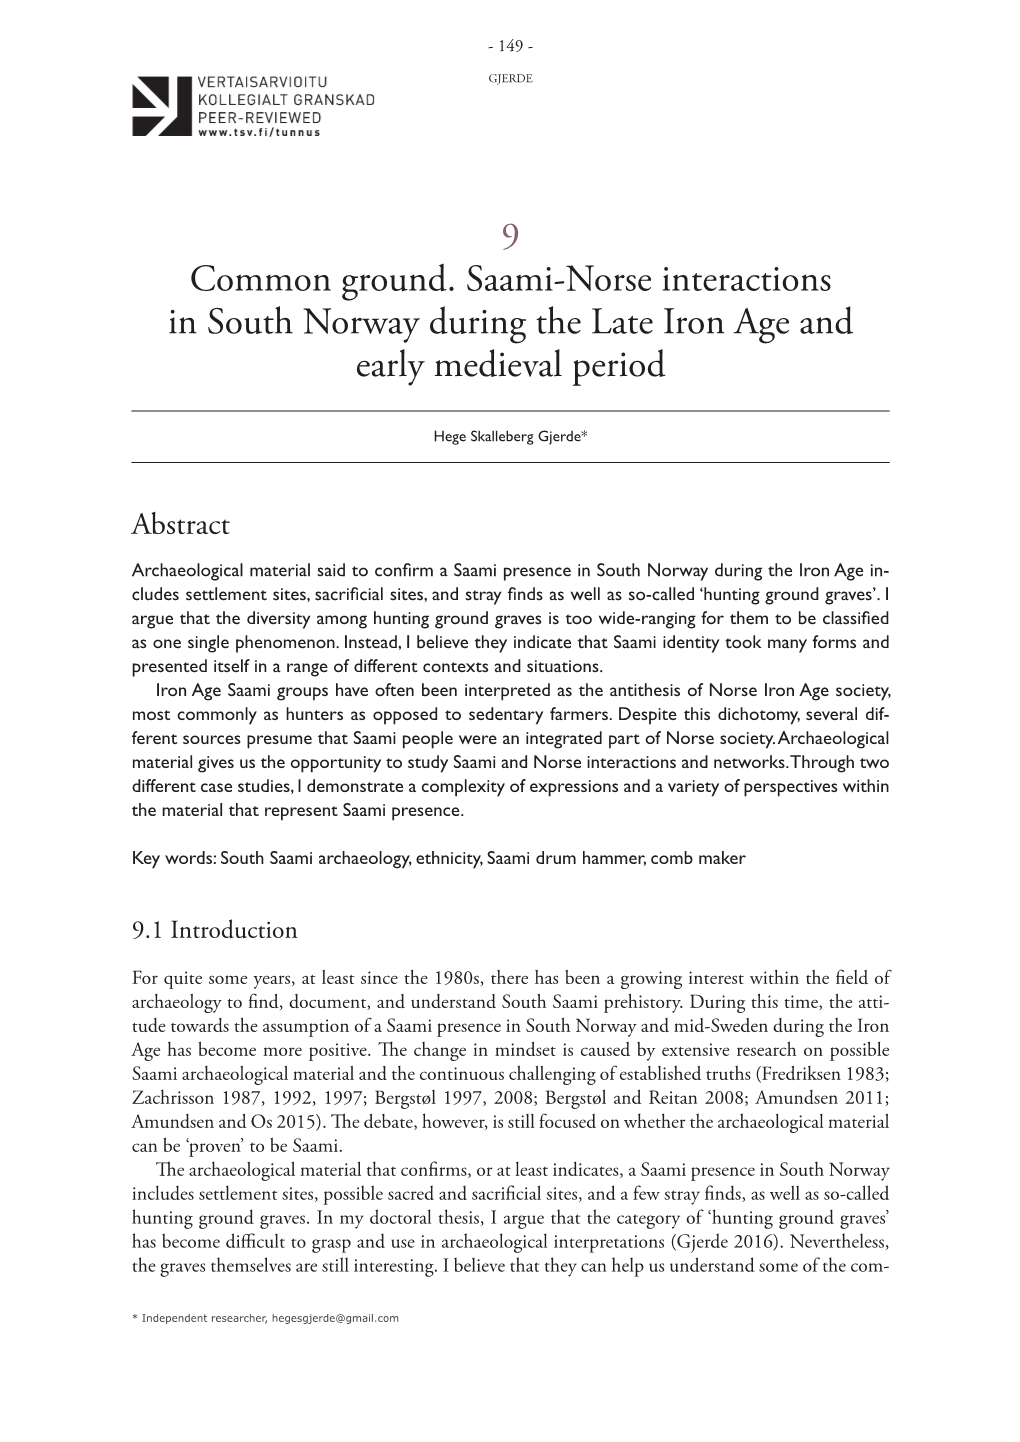 9 Common Ground. Saami-Norse Interactions in South Norway During the Late Iron Age and Early Medieval Period